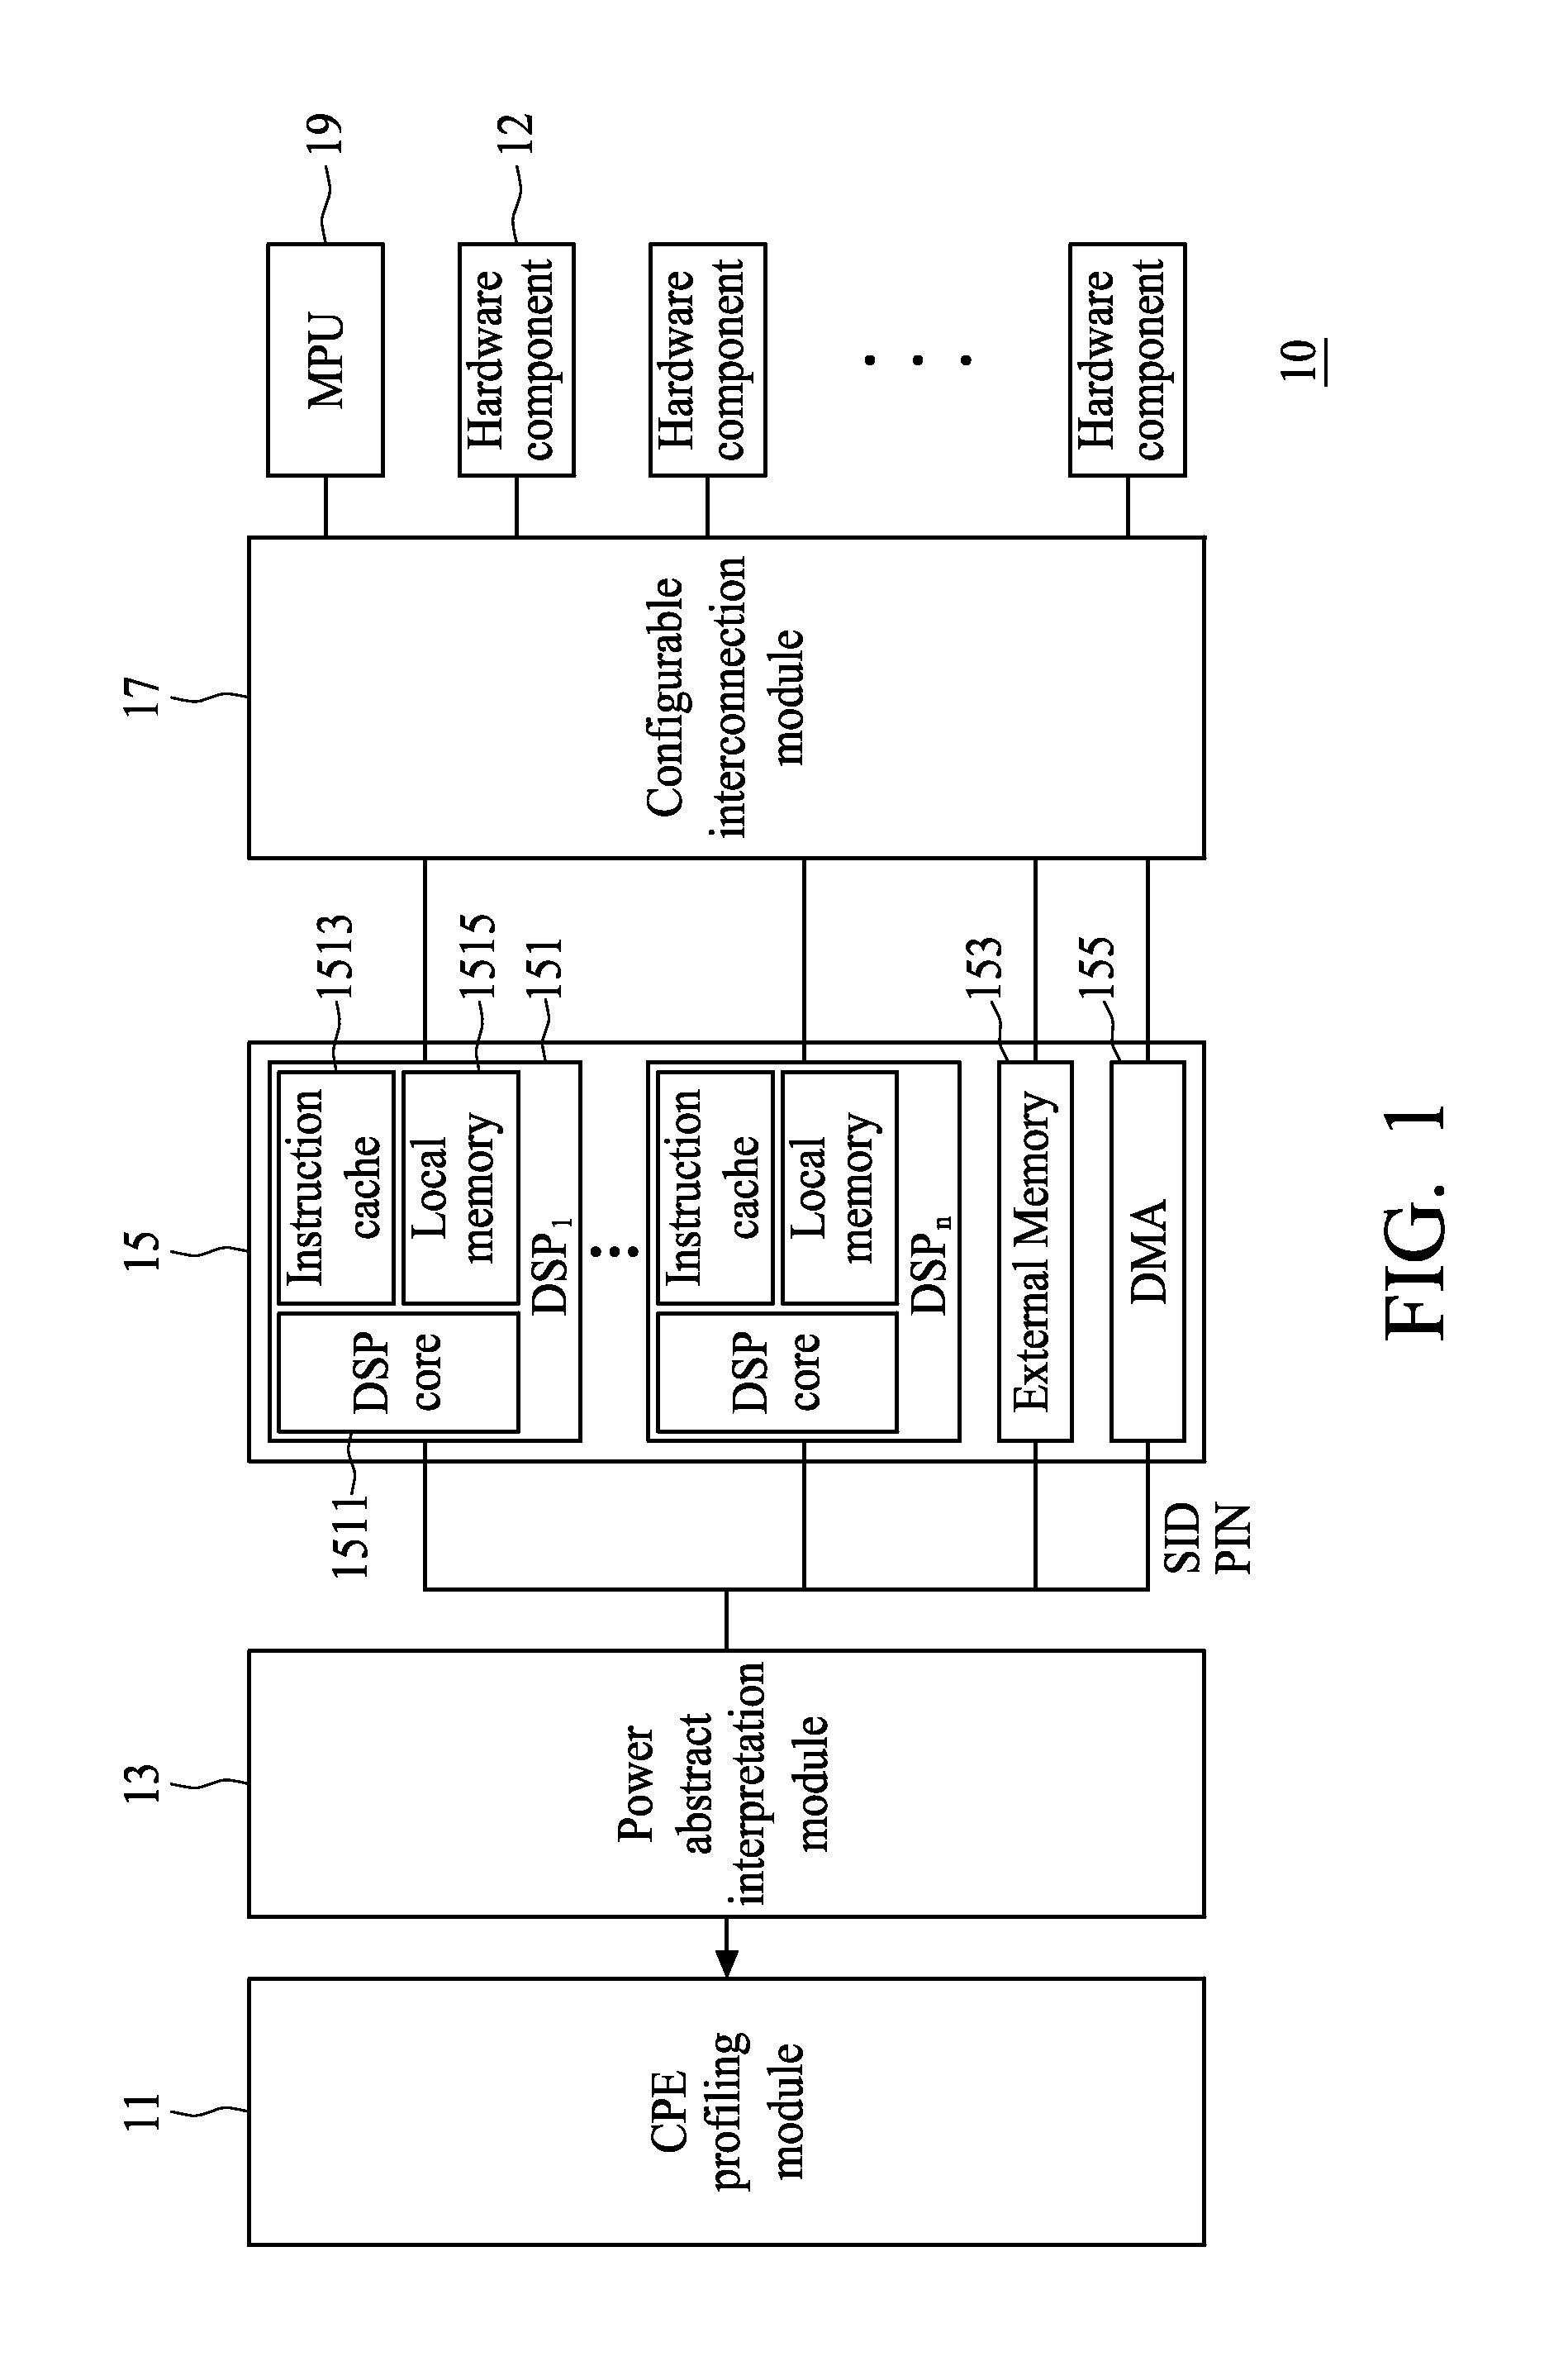 Power aware simulation system with embedded multi-core DSP